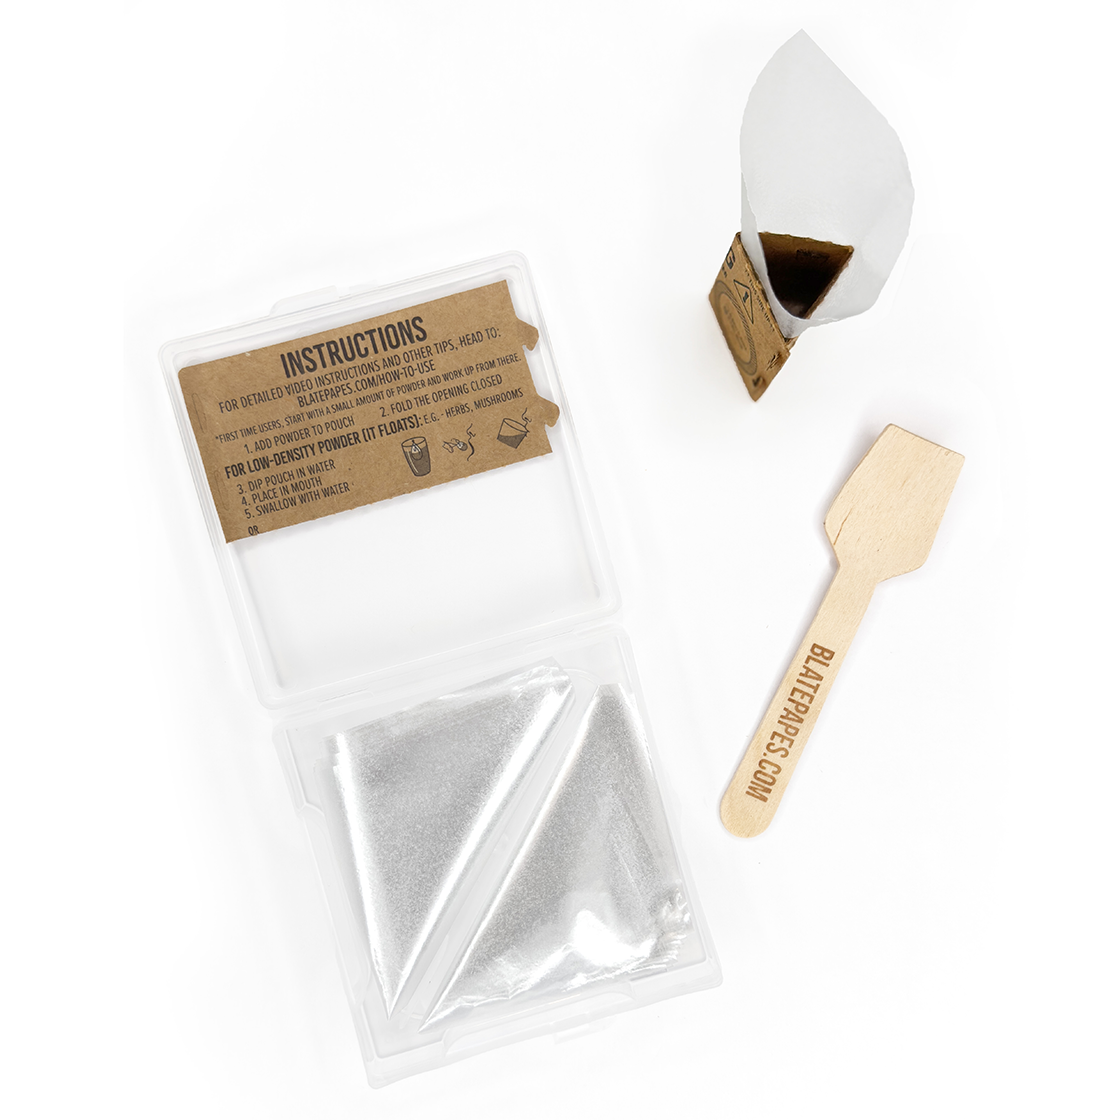 Photographic image depicting the inside instruction panel within a packet of Blate Papes, Edible Film Pouches. Includes a wooden measuring spoon.